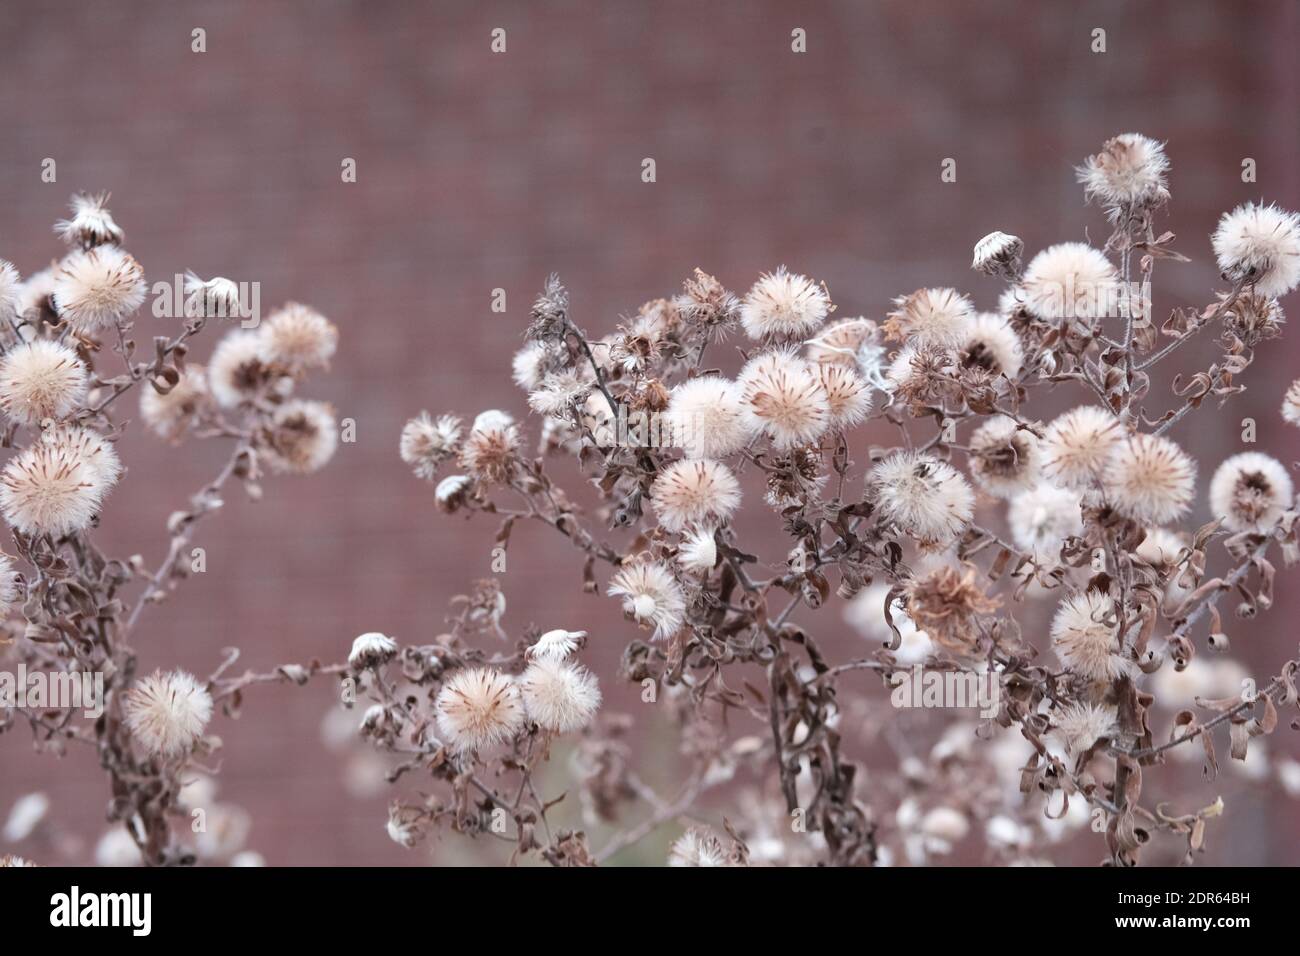 Fluffy white seed heads in winter against a red brick wall. Pretty as a picture. Ottawa, Ontario, Canada. Stock Photo